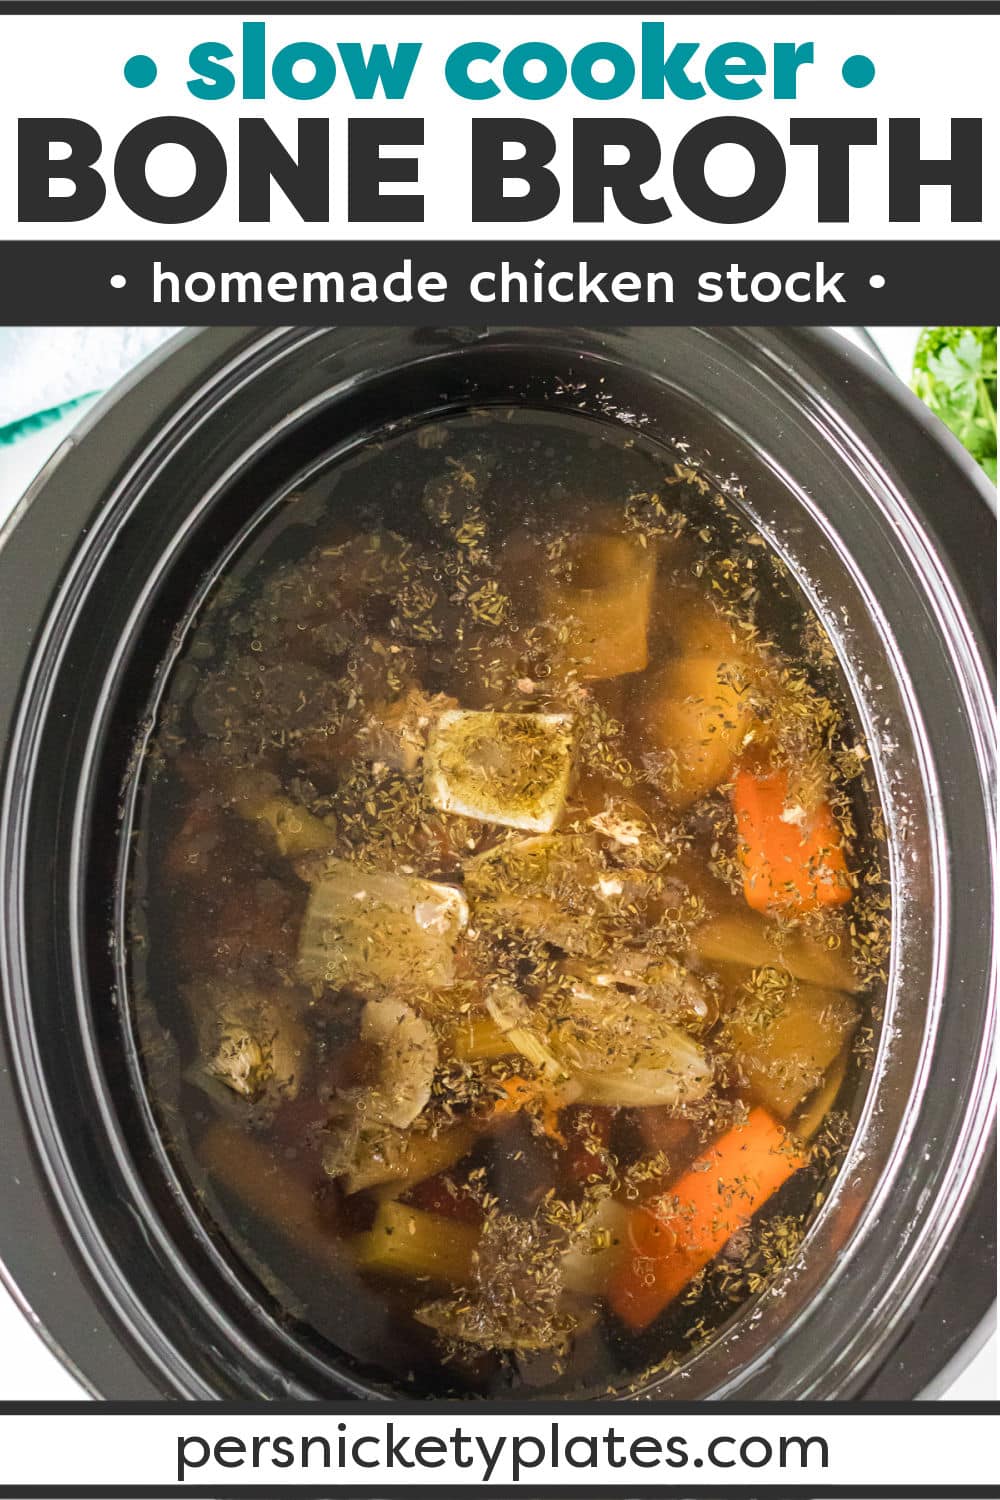 Learning to make slow cooker chicken stock is one of the best and easiest ways to make a nutrient-rich stock that can be used for soups, gravies, sauces, and more. This simple, budget-friendly, dump-and-set recipe delivers a rich broth that is so flavorful you'll find it hard to go back to using a store-bought can or carton! | www.persnicketyplates.com